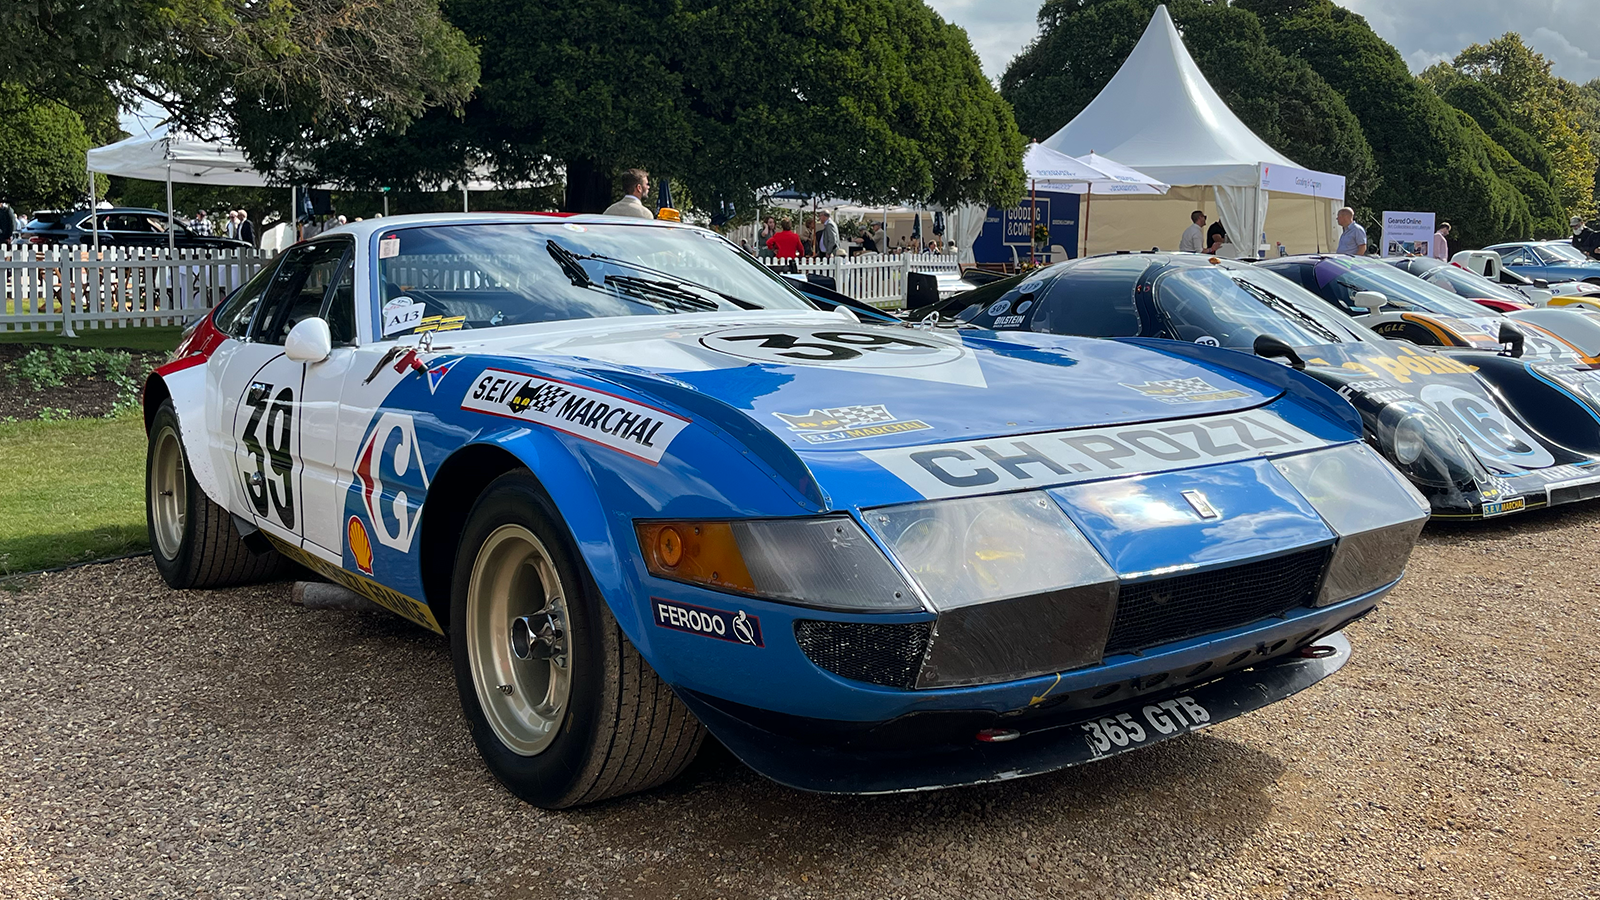 24 stars from Concours of Elegance 2023